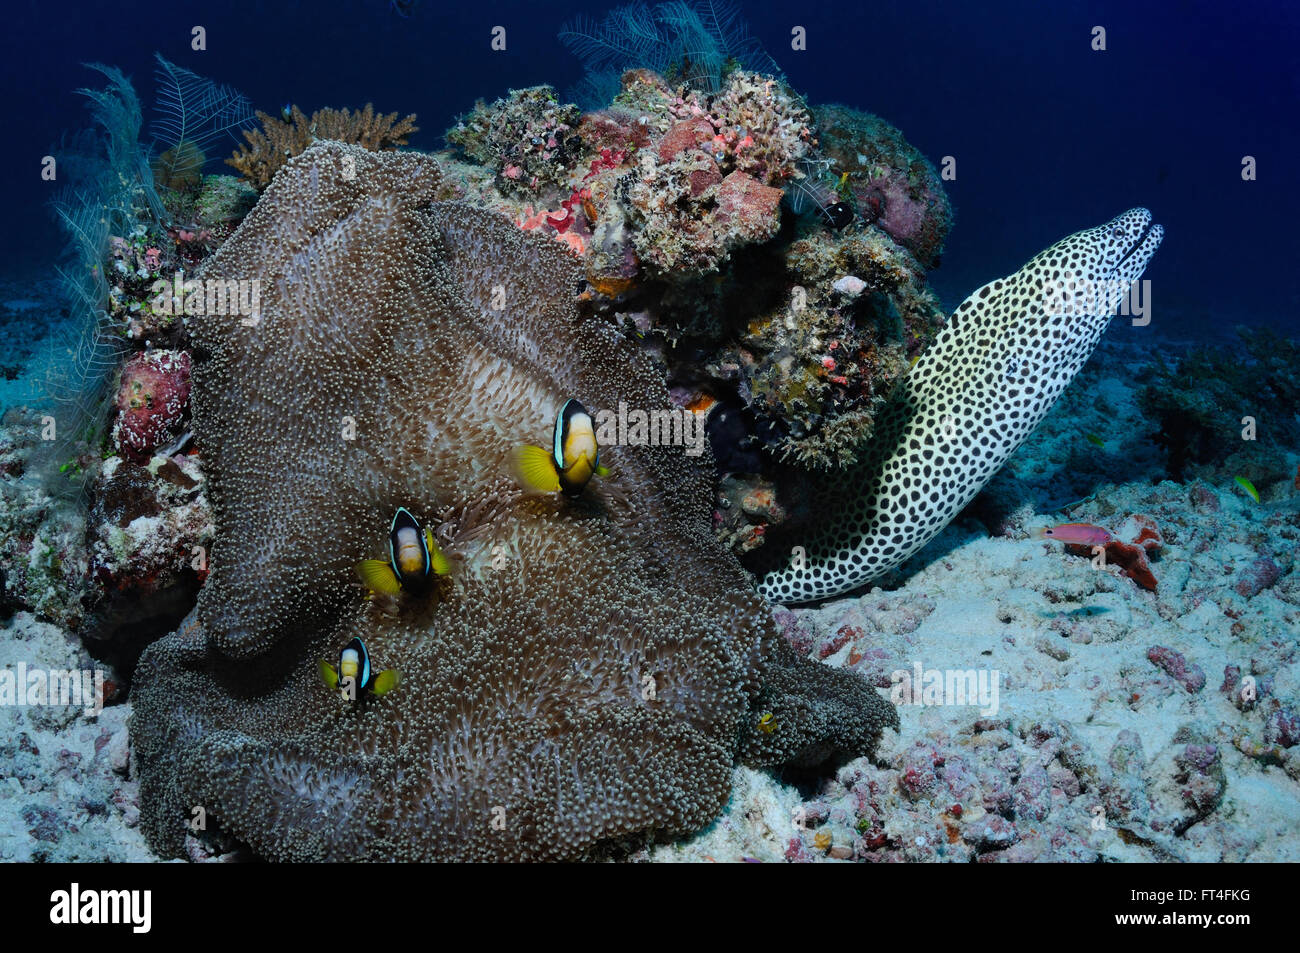 Honeycomb moray eel and anemone in a shape of a frog fish with amphiprions (Yellowtail clownfish) on it, Ari Atoll, Maldives Stock Photo